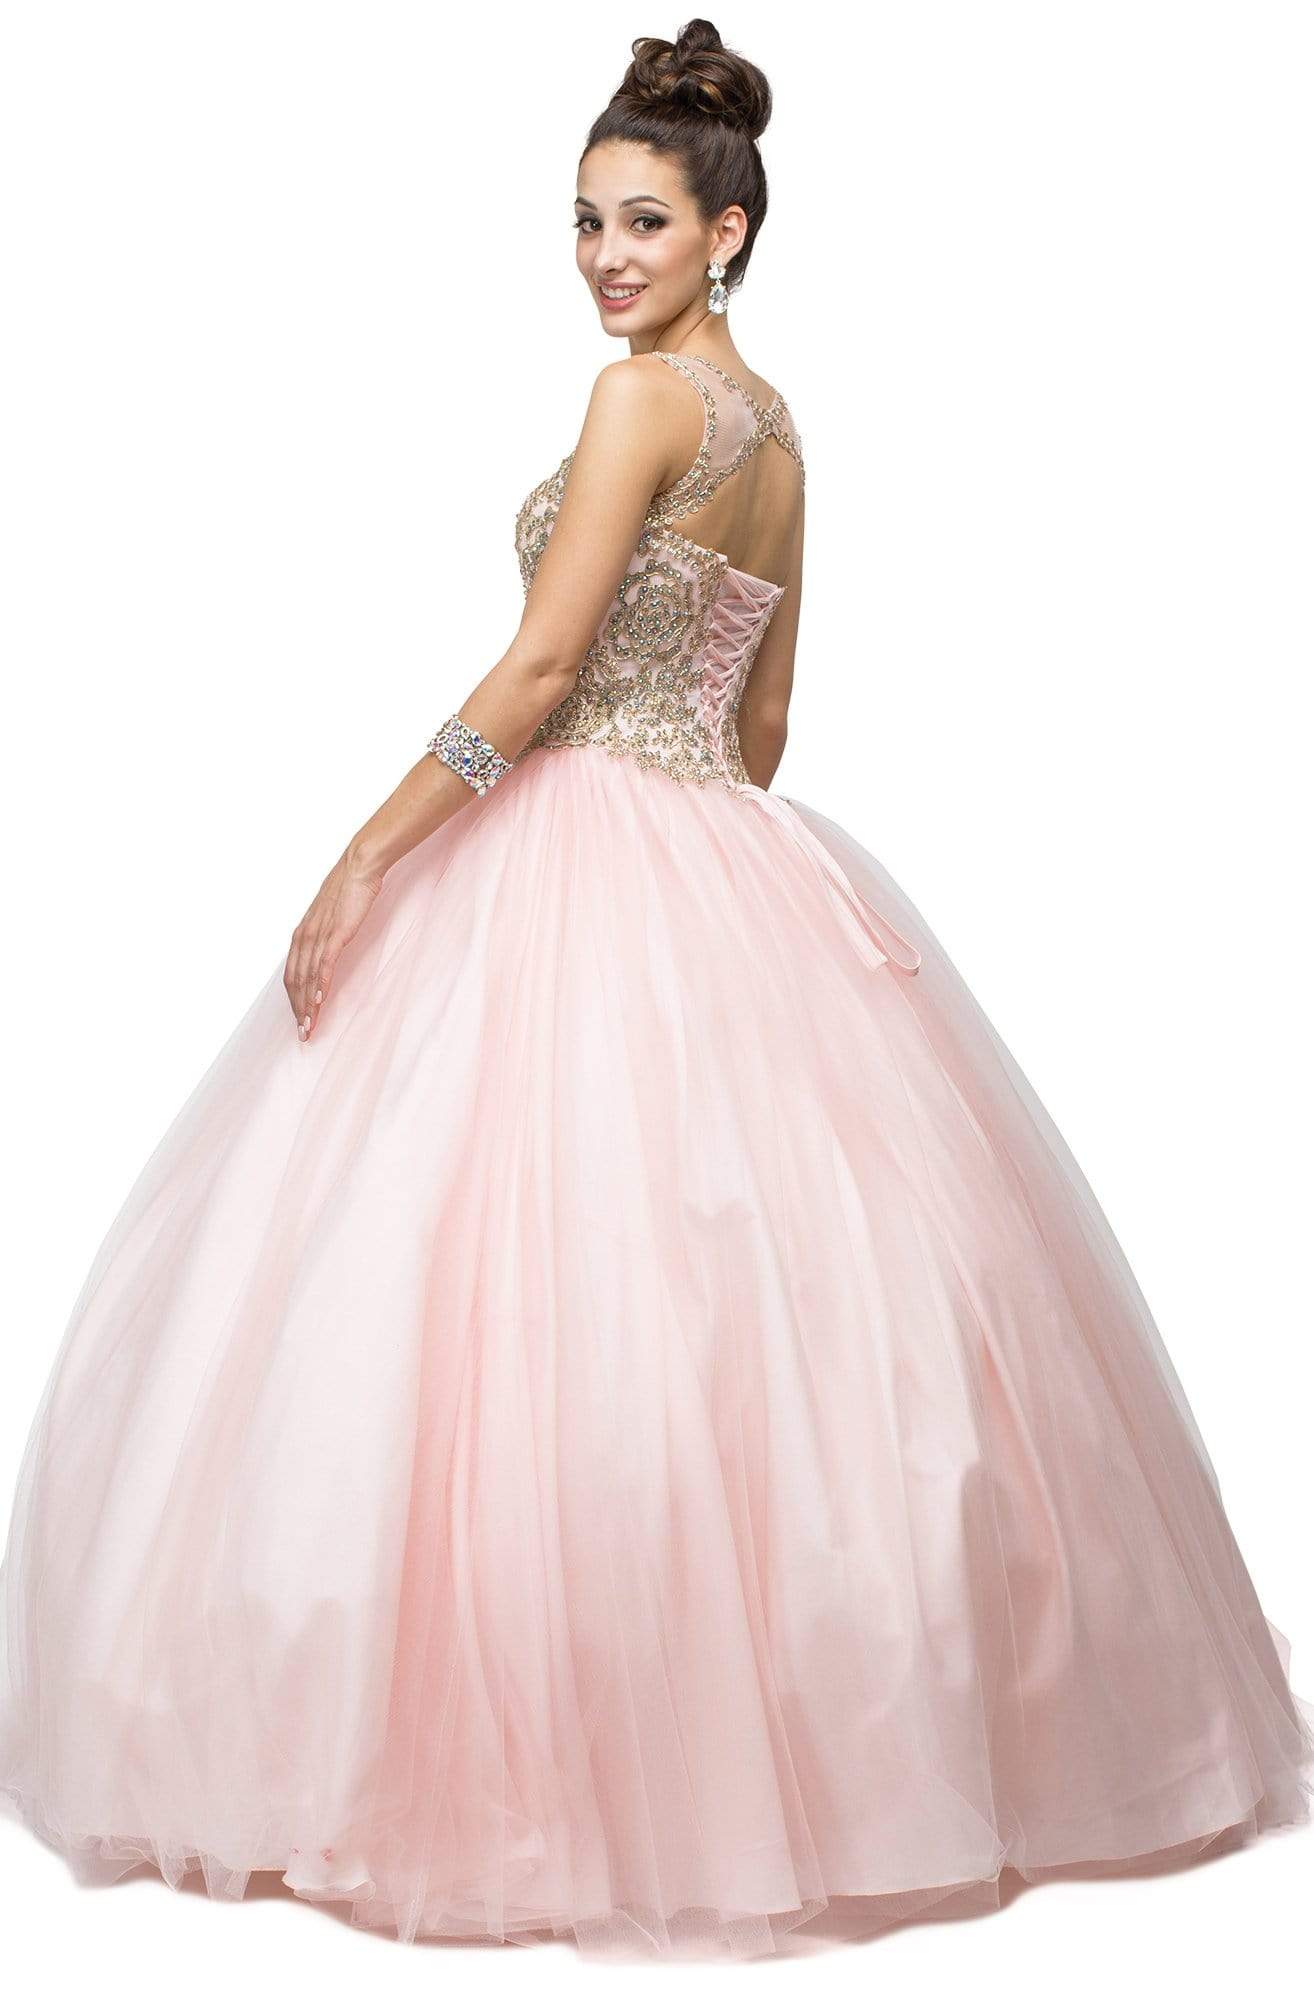 Dancing Queen - 1101 Gold Embroidered Illusion Neck Formal Ball Gown Quinceanera Dresses XS / Blush